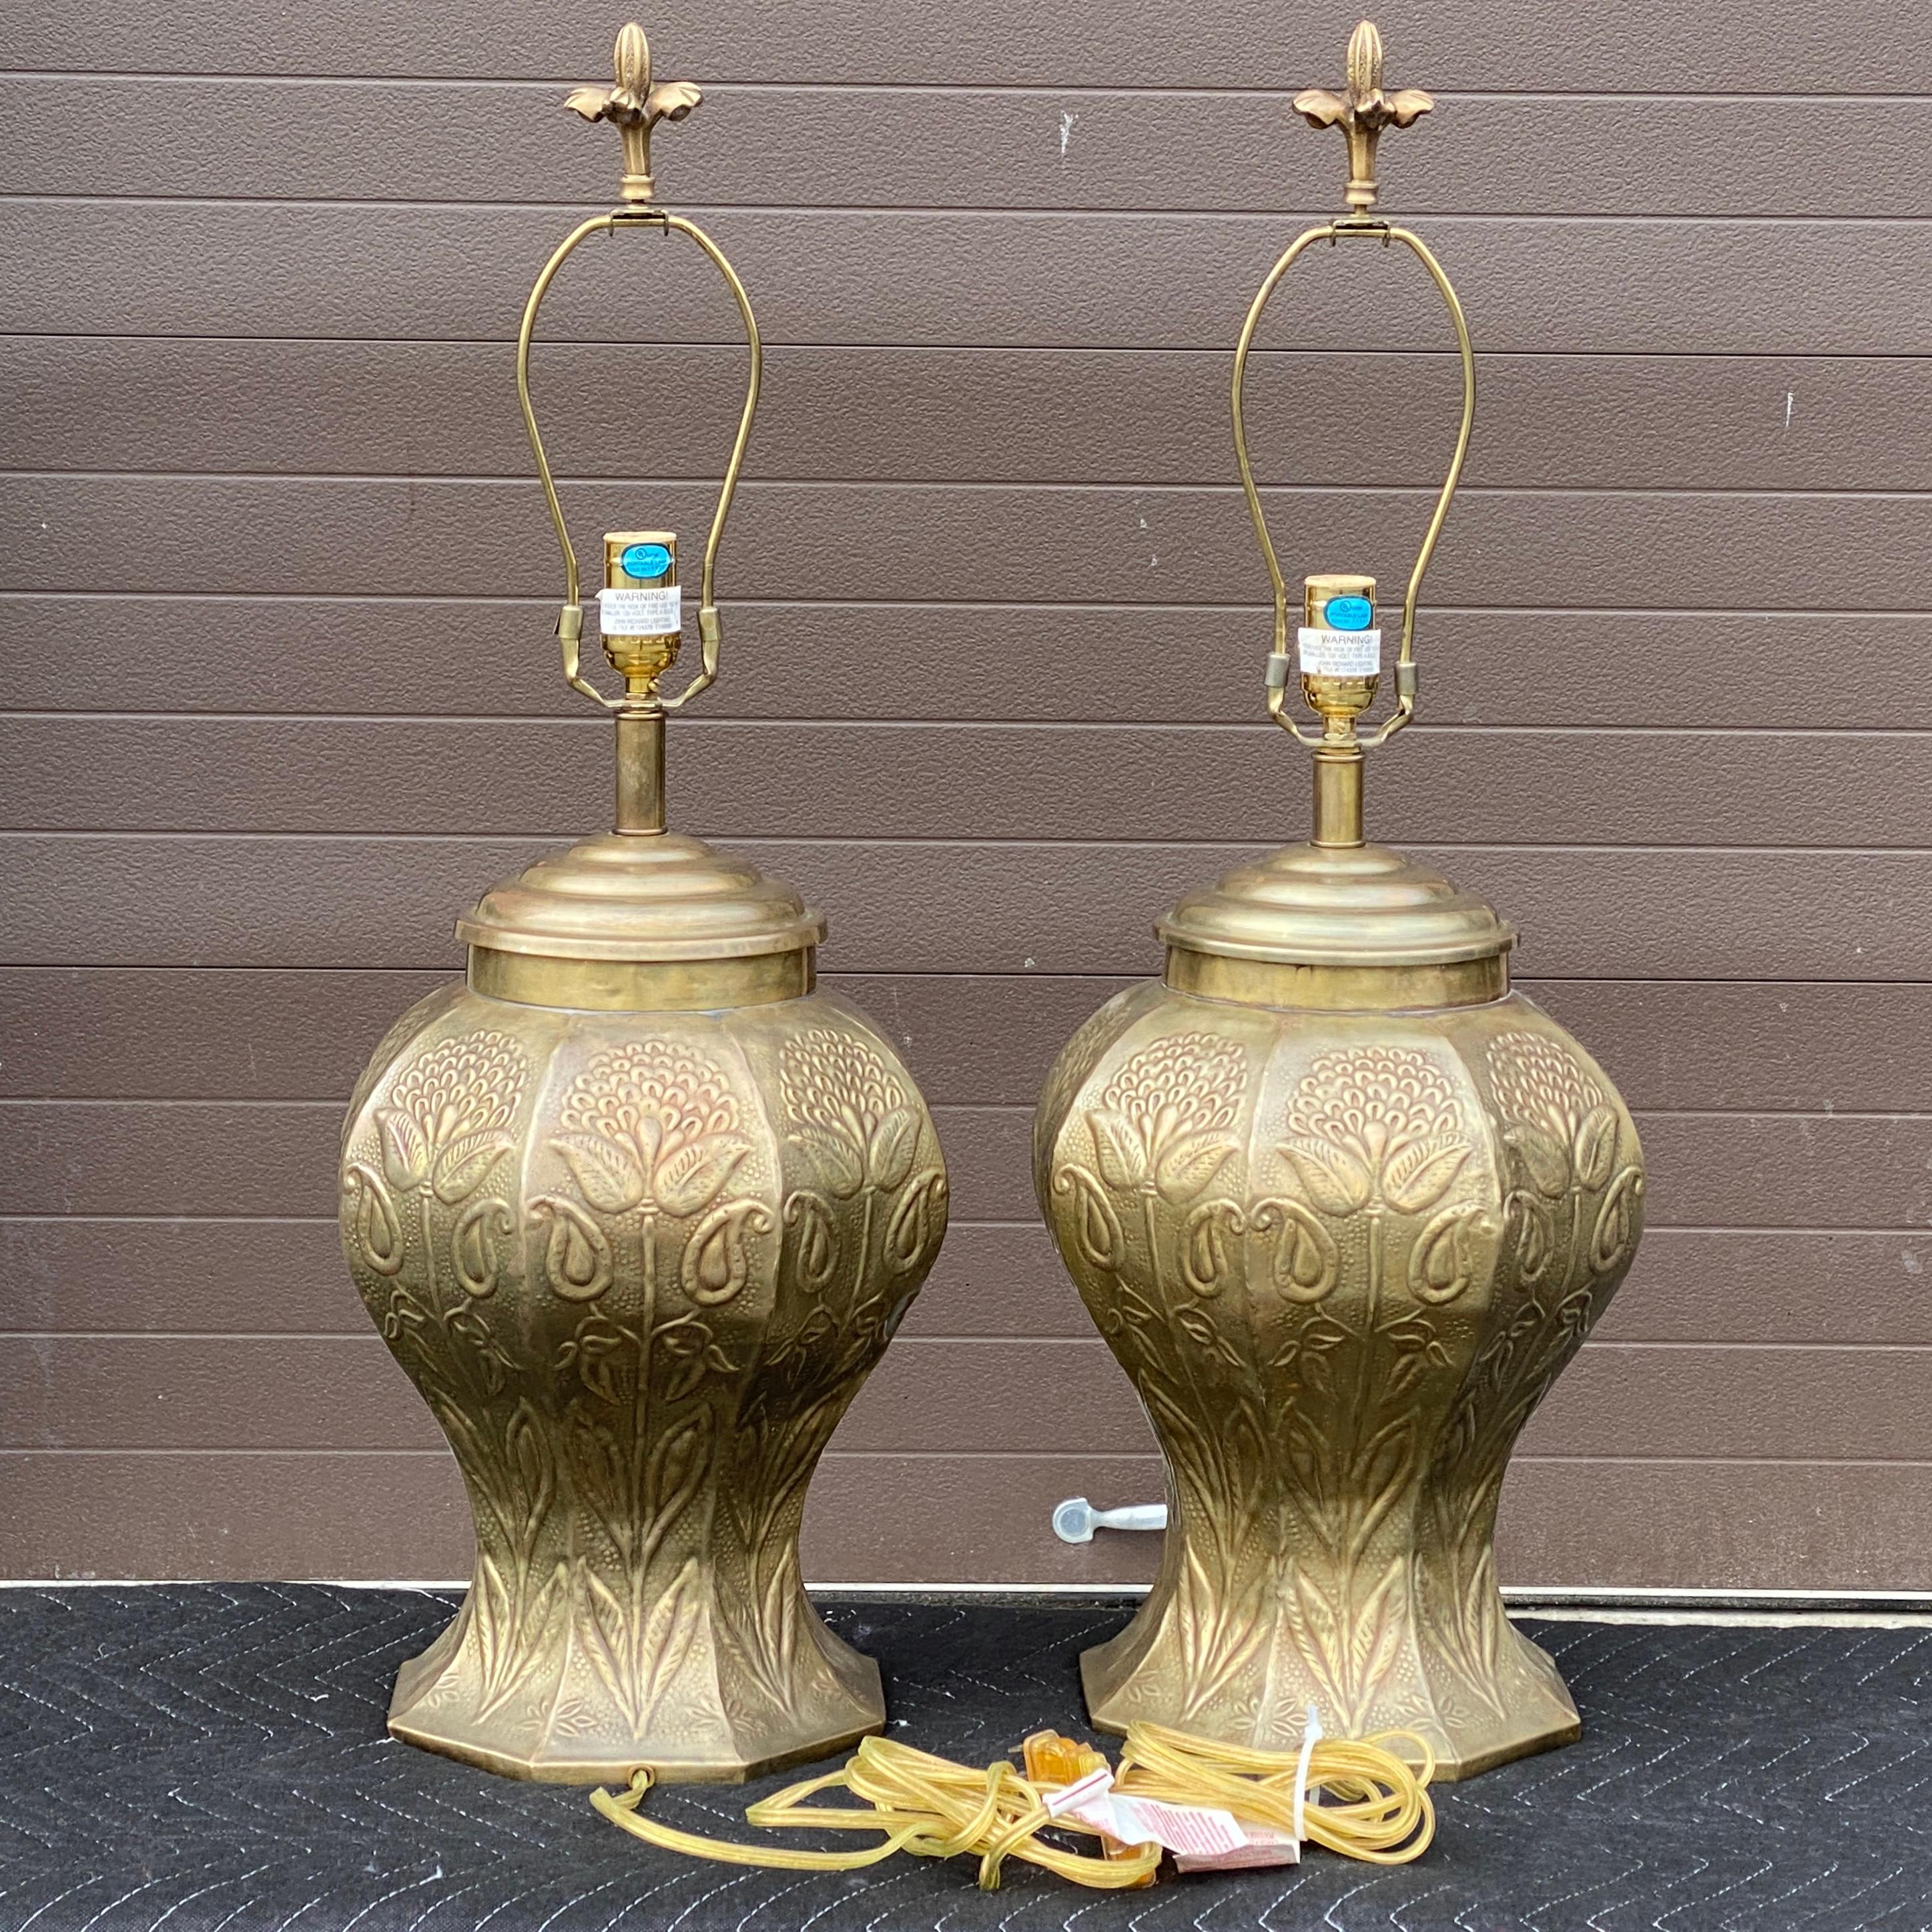 20th Century Pair John Richard Hammered Brass Table Lamps With Floral Finials For Sale